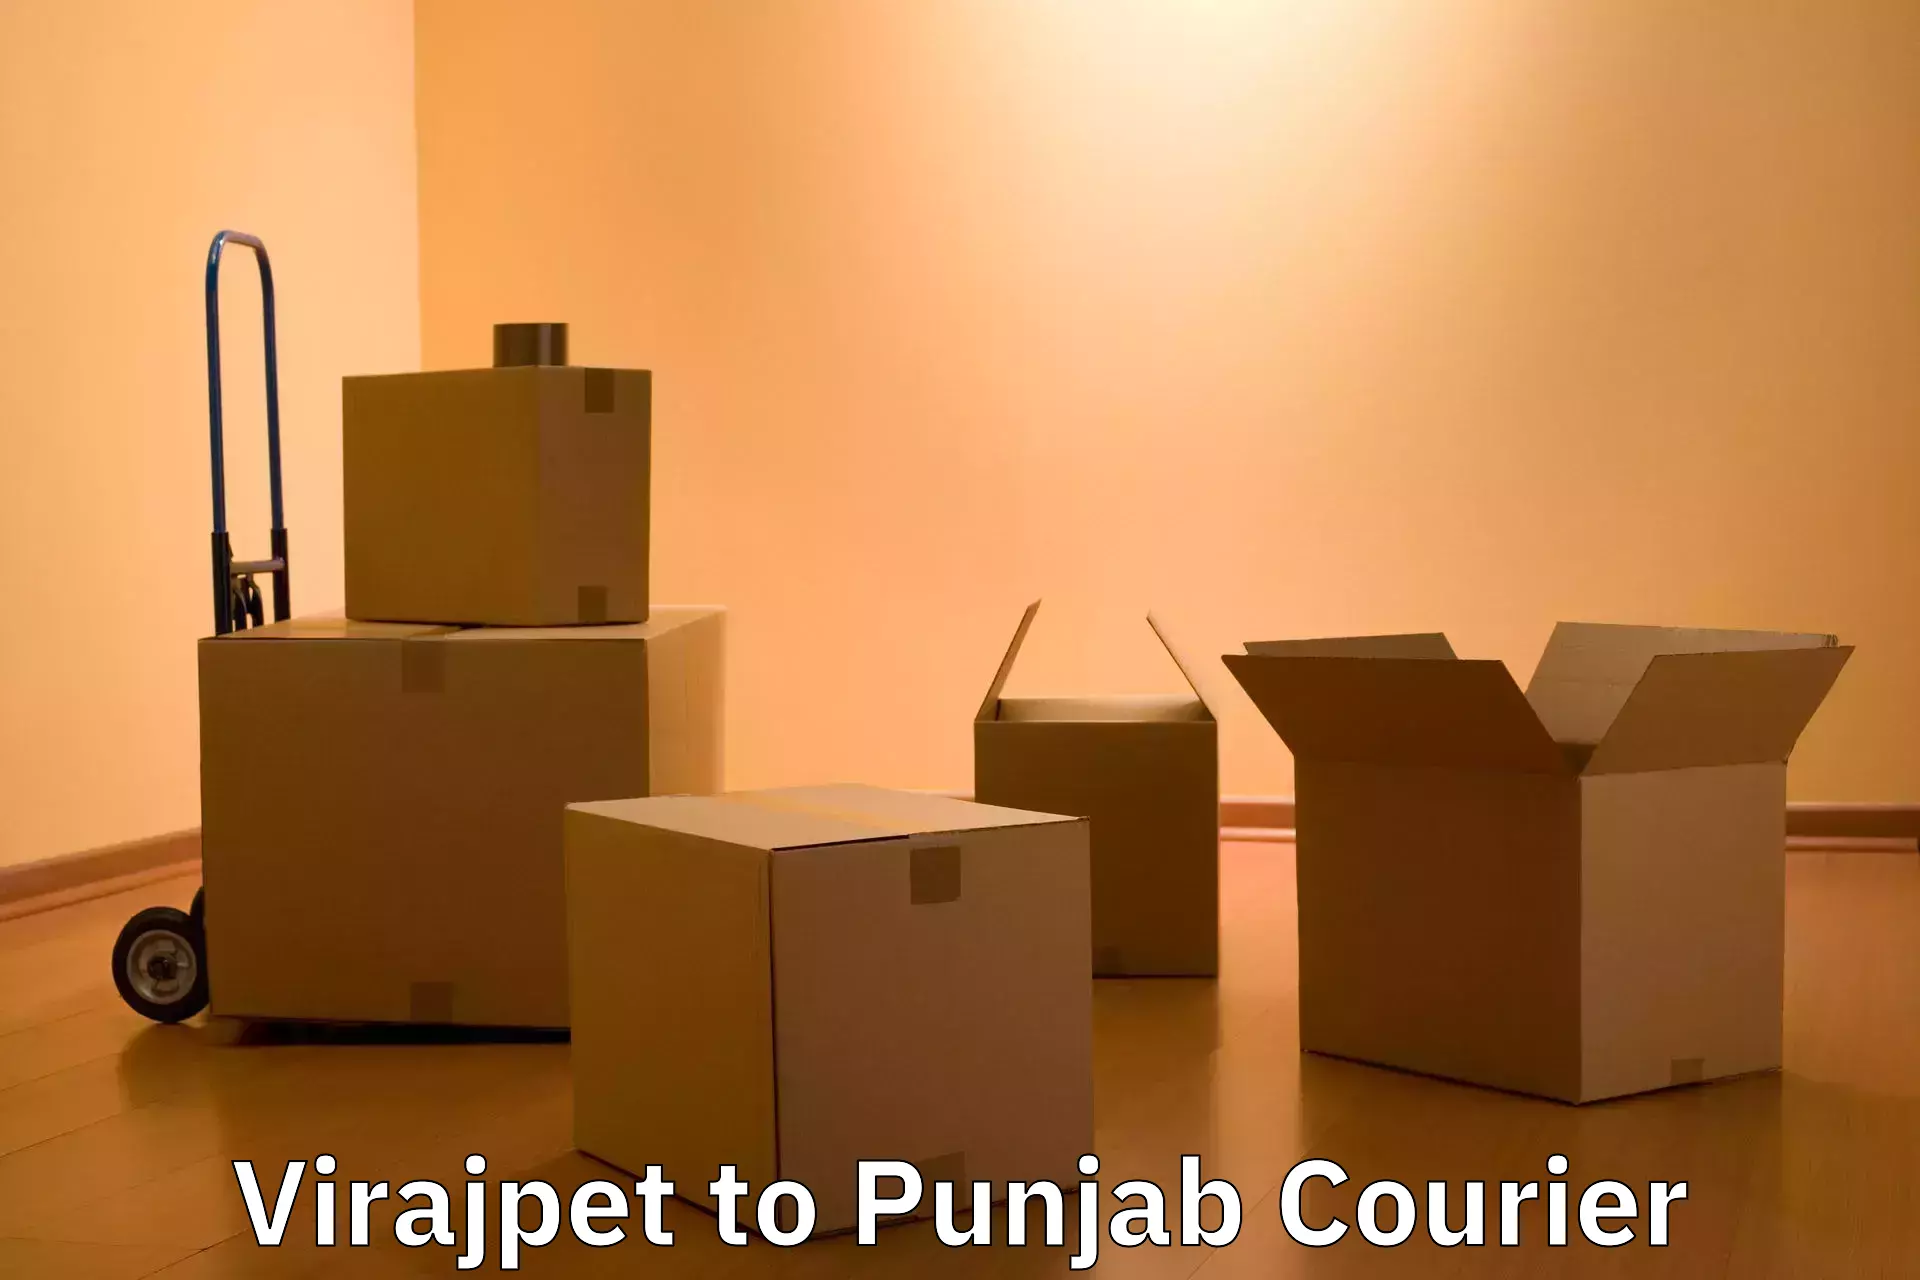 Luggage delivery app Virajpet to Punjab